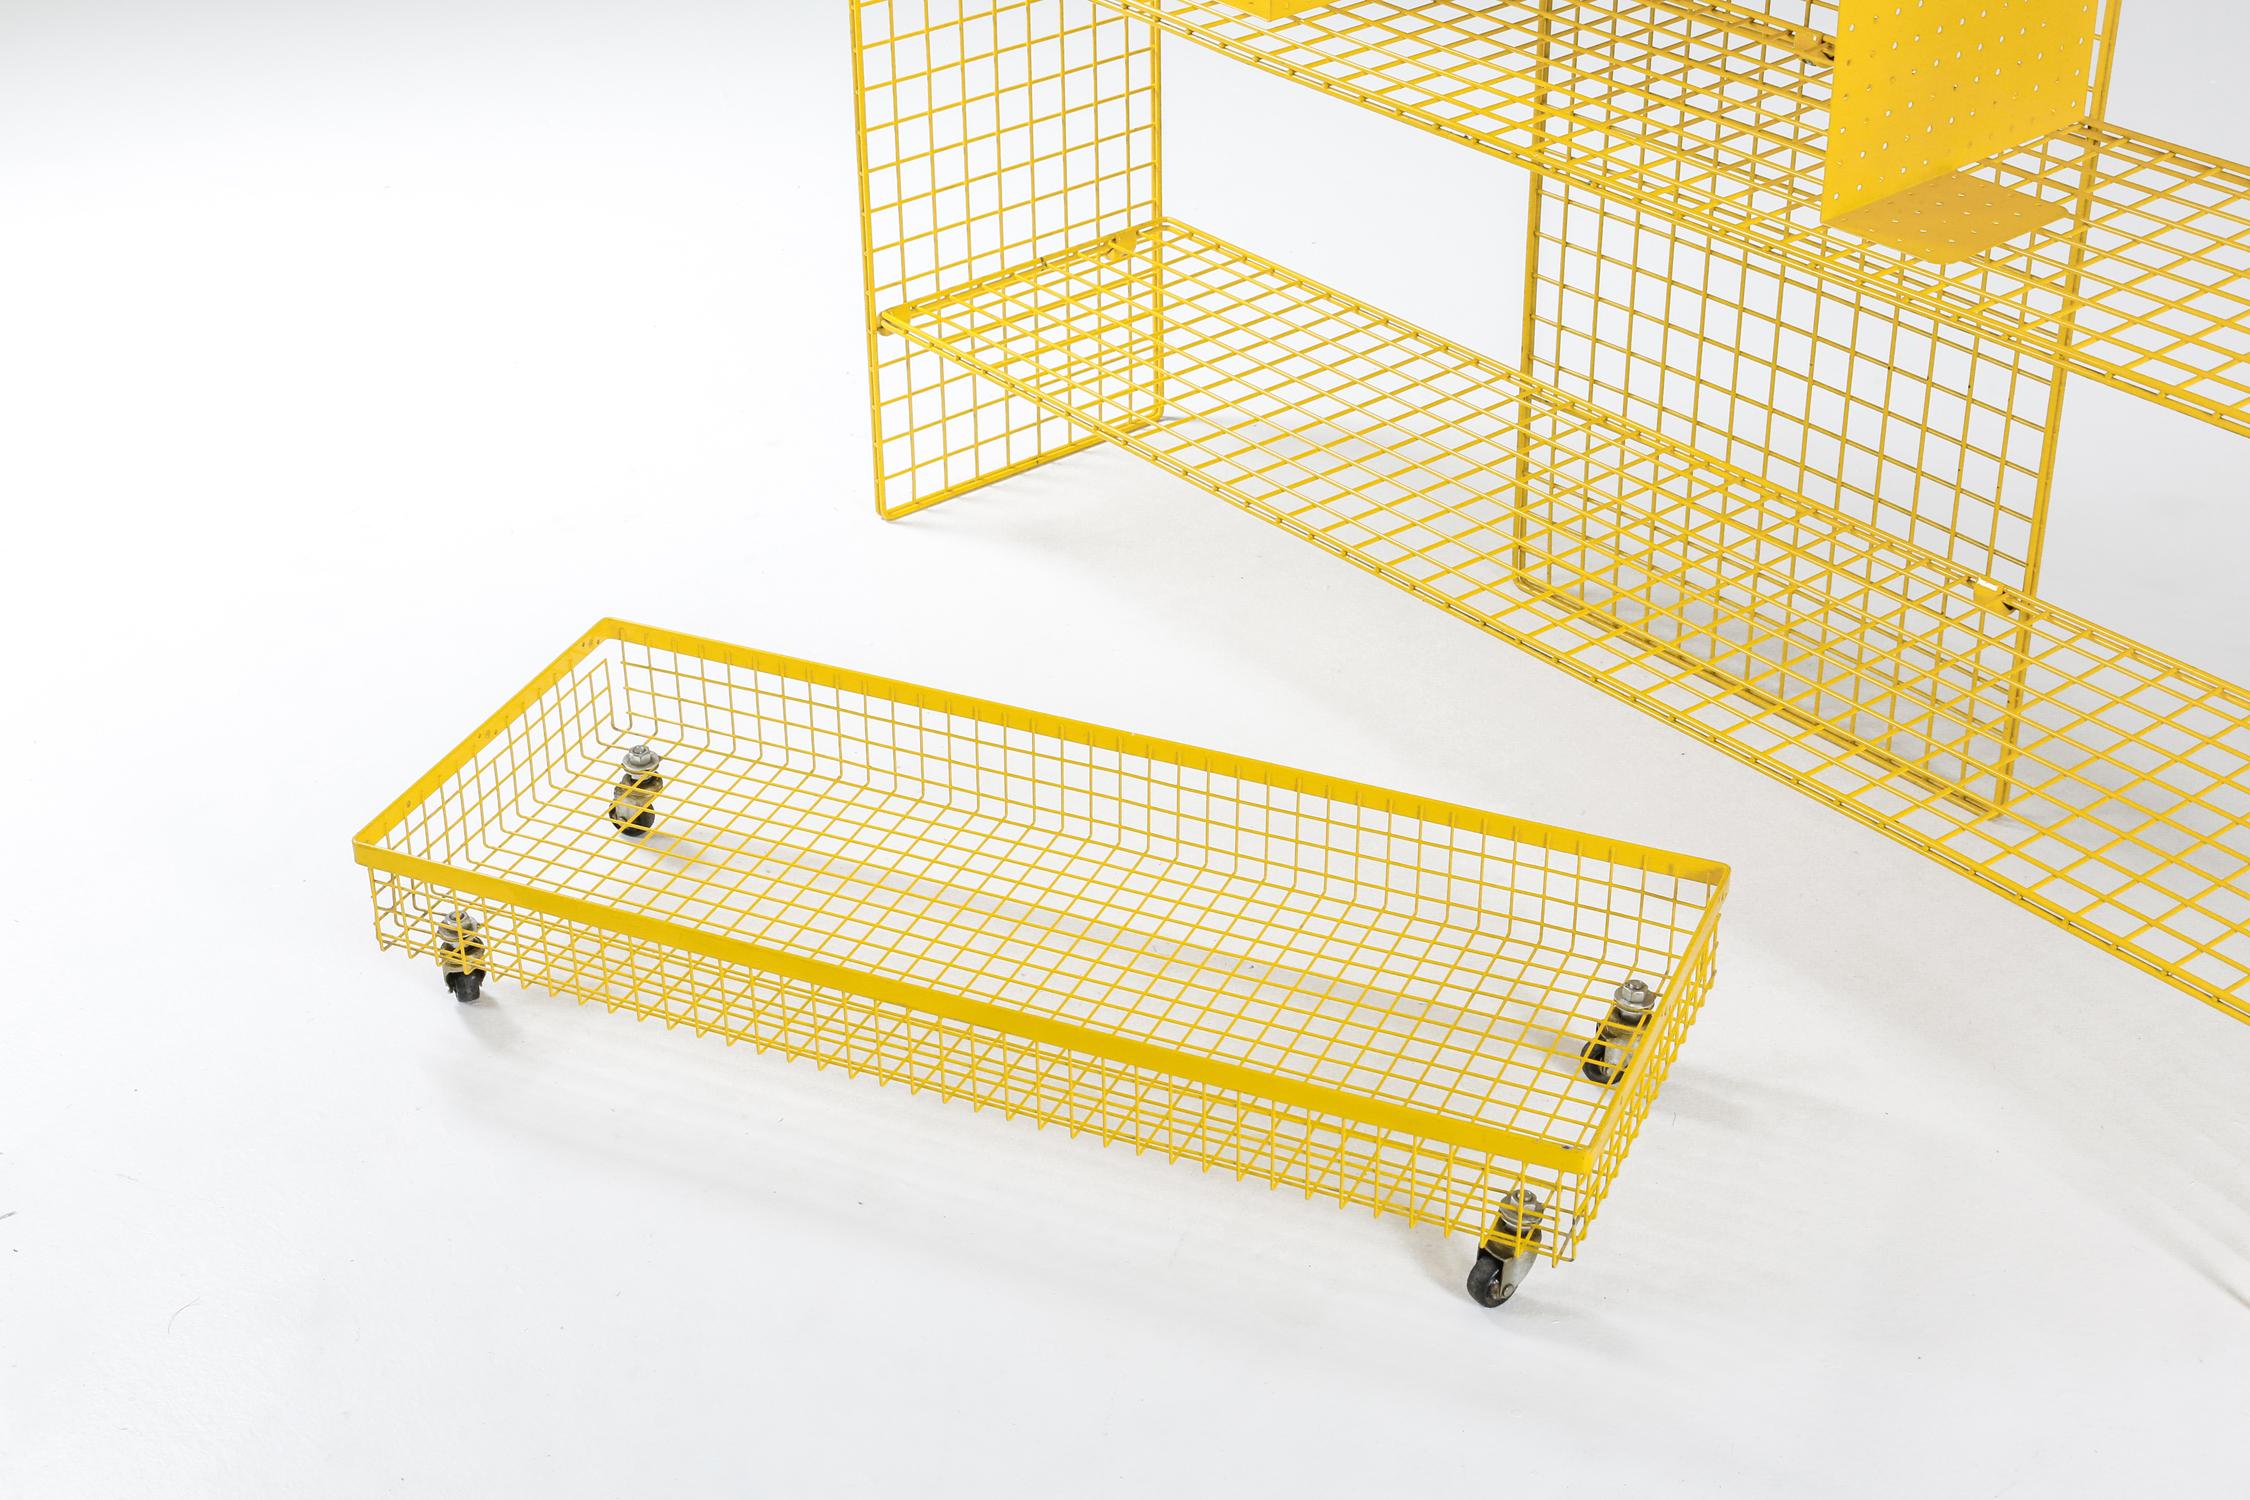 Bieffeplast yellow metal shelving unit, post-modern Italian design, 1970

Memphis style piece reminiscent of Enzo Mari & other great Italian designers.
Also the bucket on wheels gives the entire storage piece a nice and humouristic touch.
Very